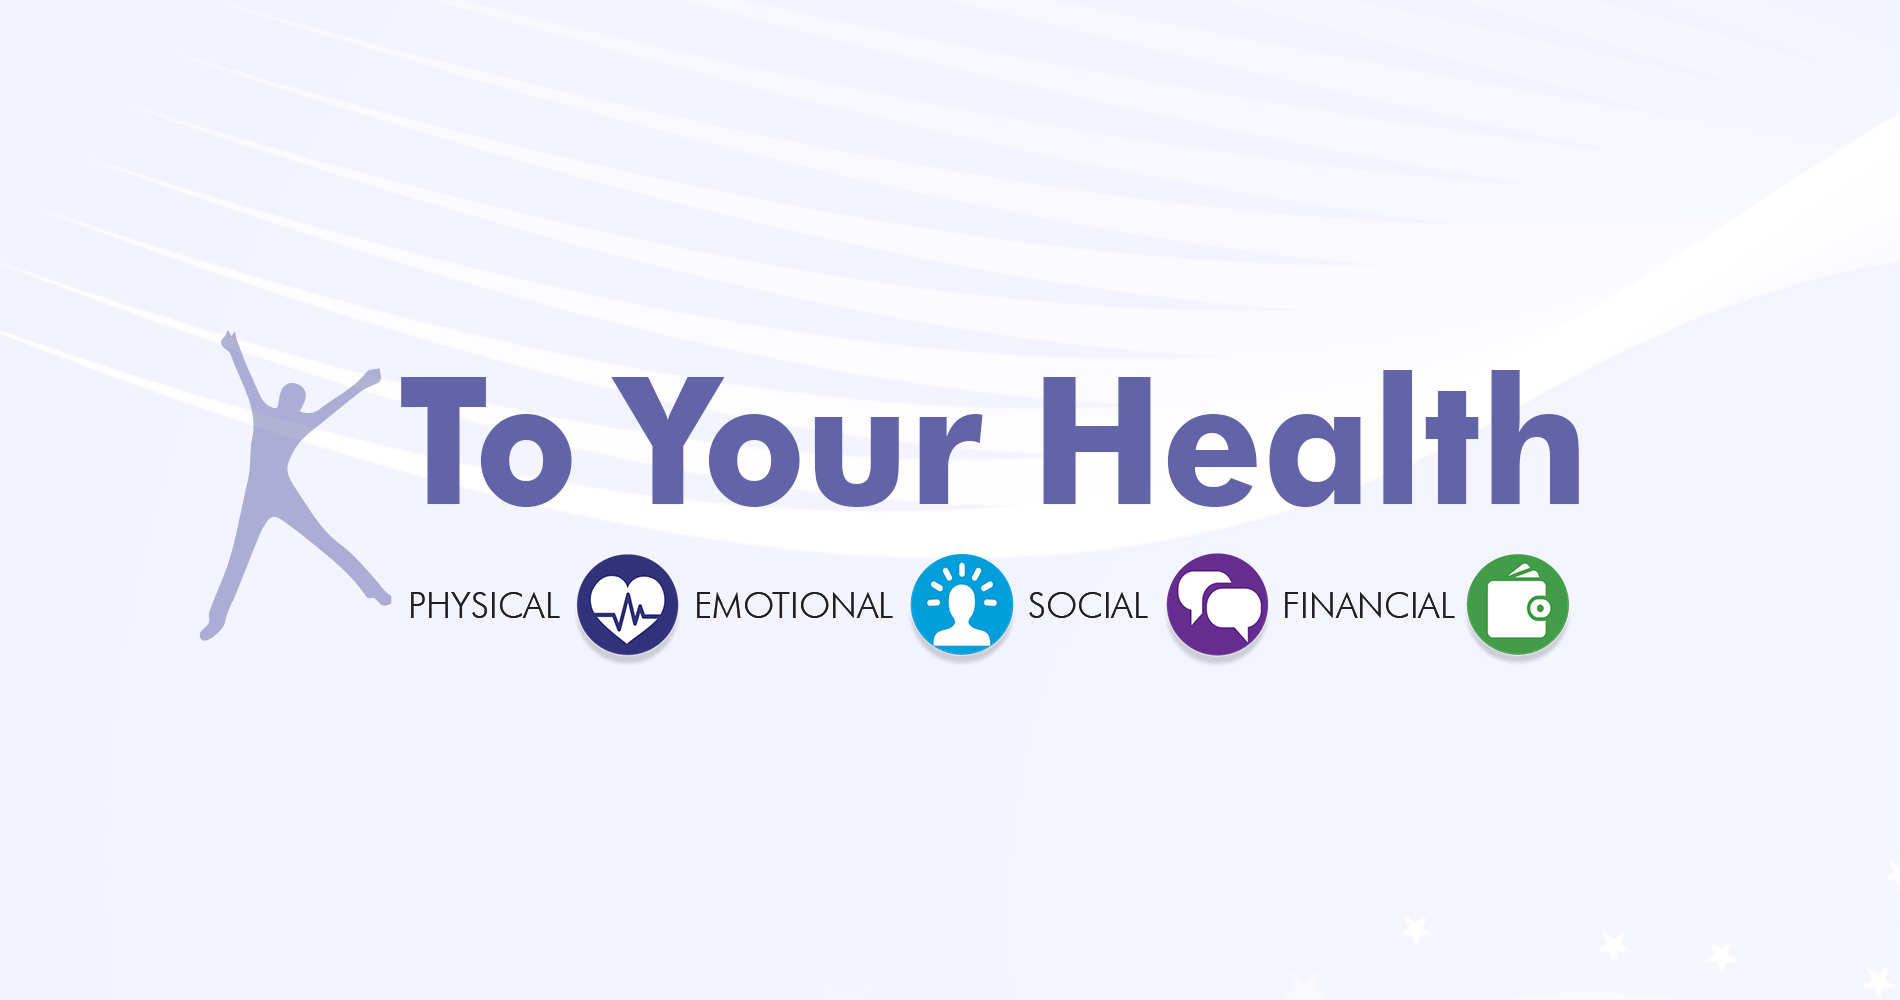 To Your Health, physical, emotional, social, emotional